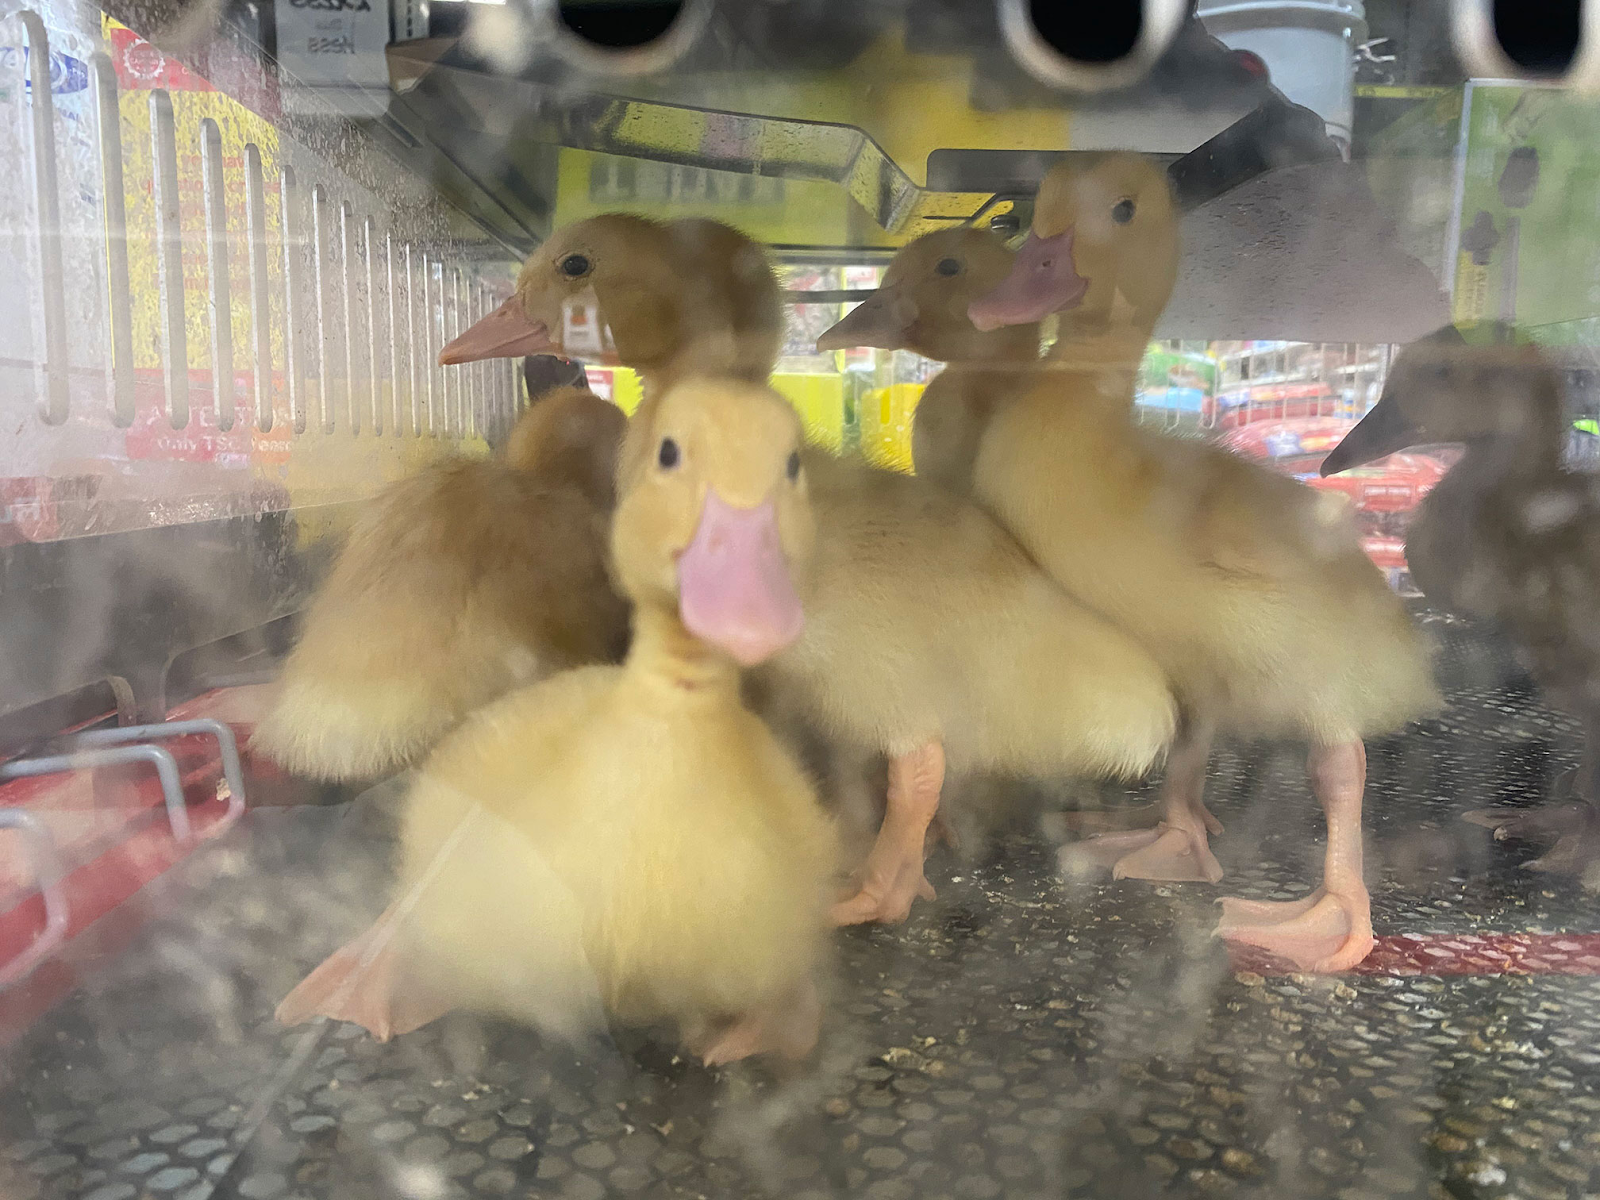 CAN I BUY A BABY DUCK?